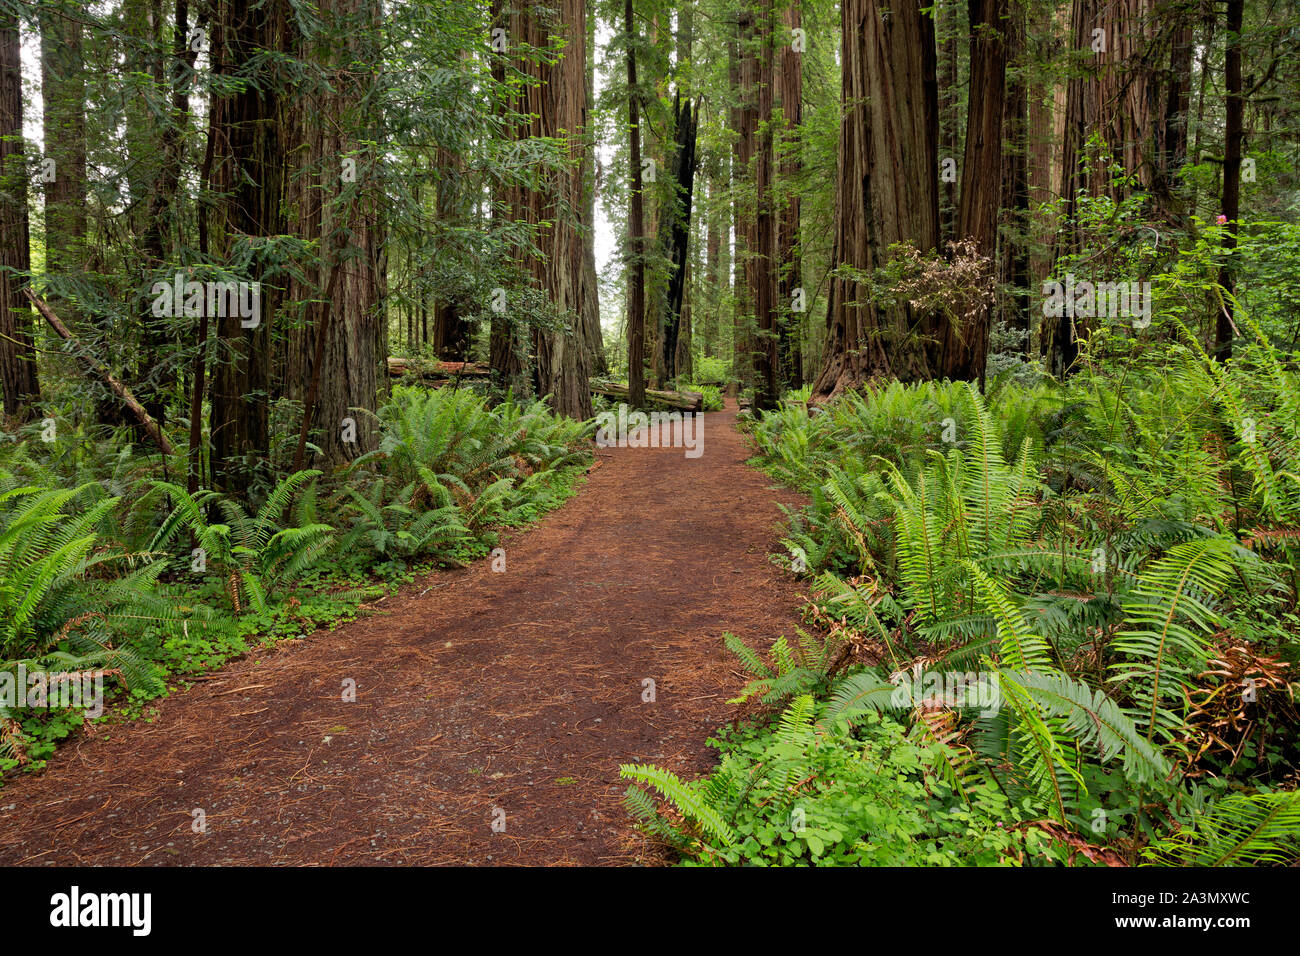 CA03623-00...CALIFORNIA - Trail through the massive redwood trees at Stout Grove in Jedehiah Smith Redwoods State Park. Stock Photo